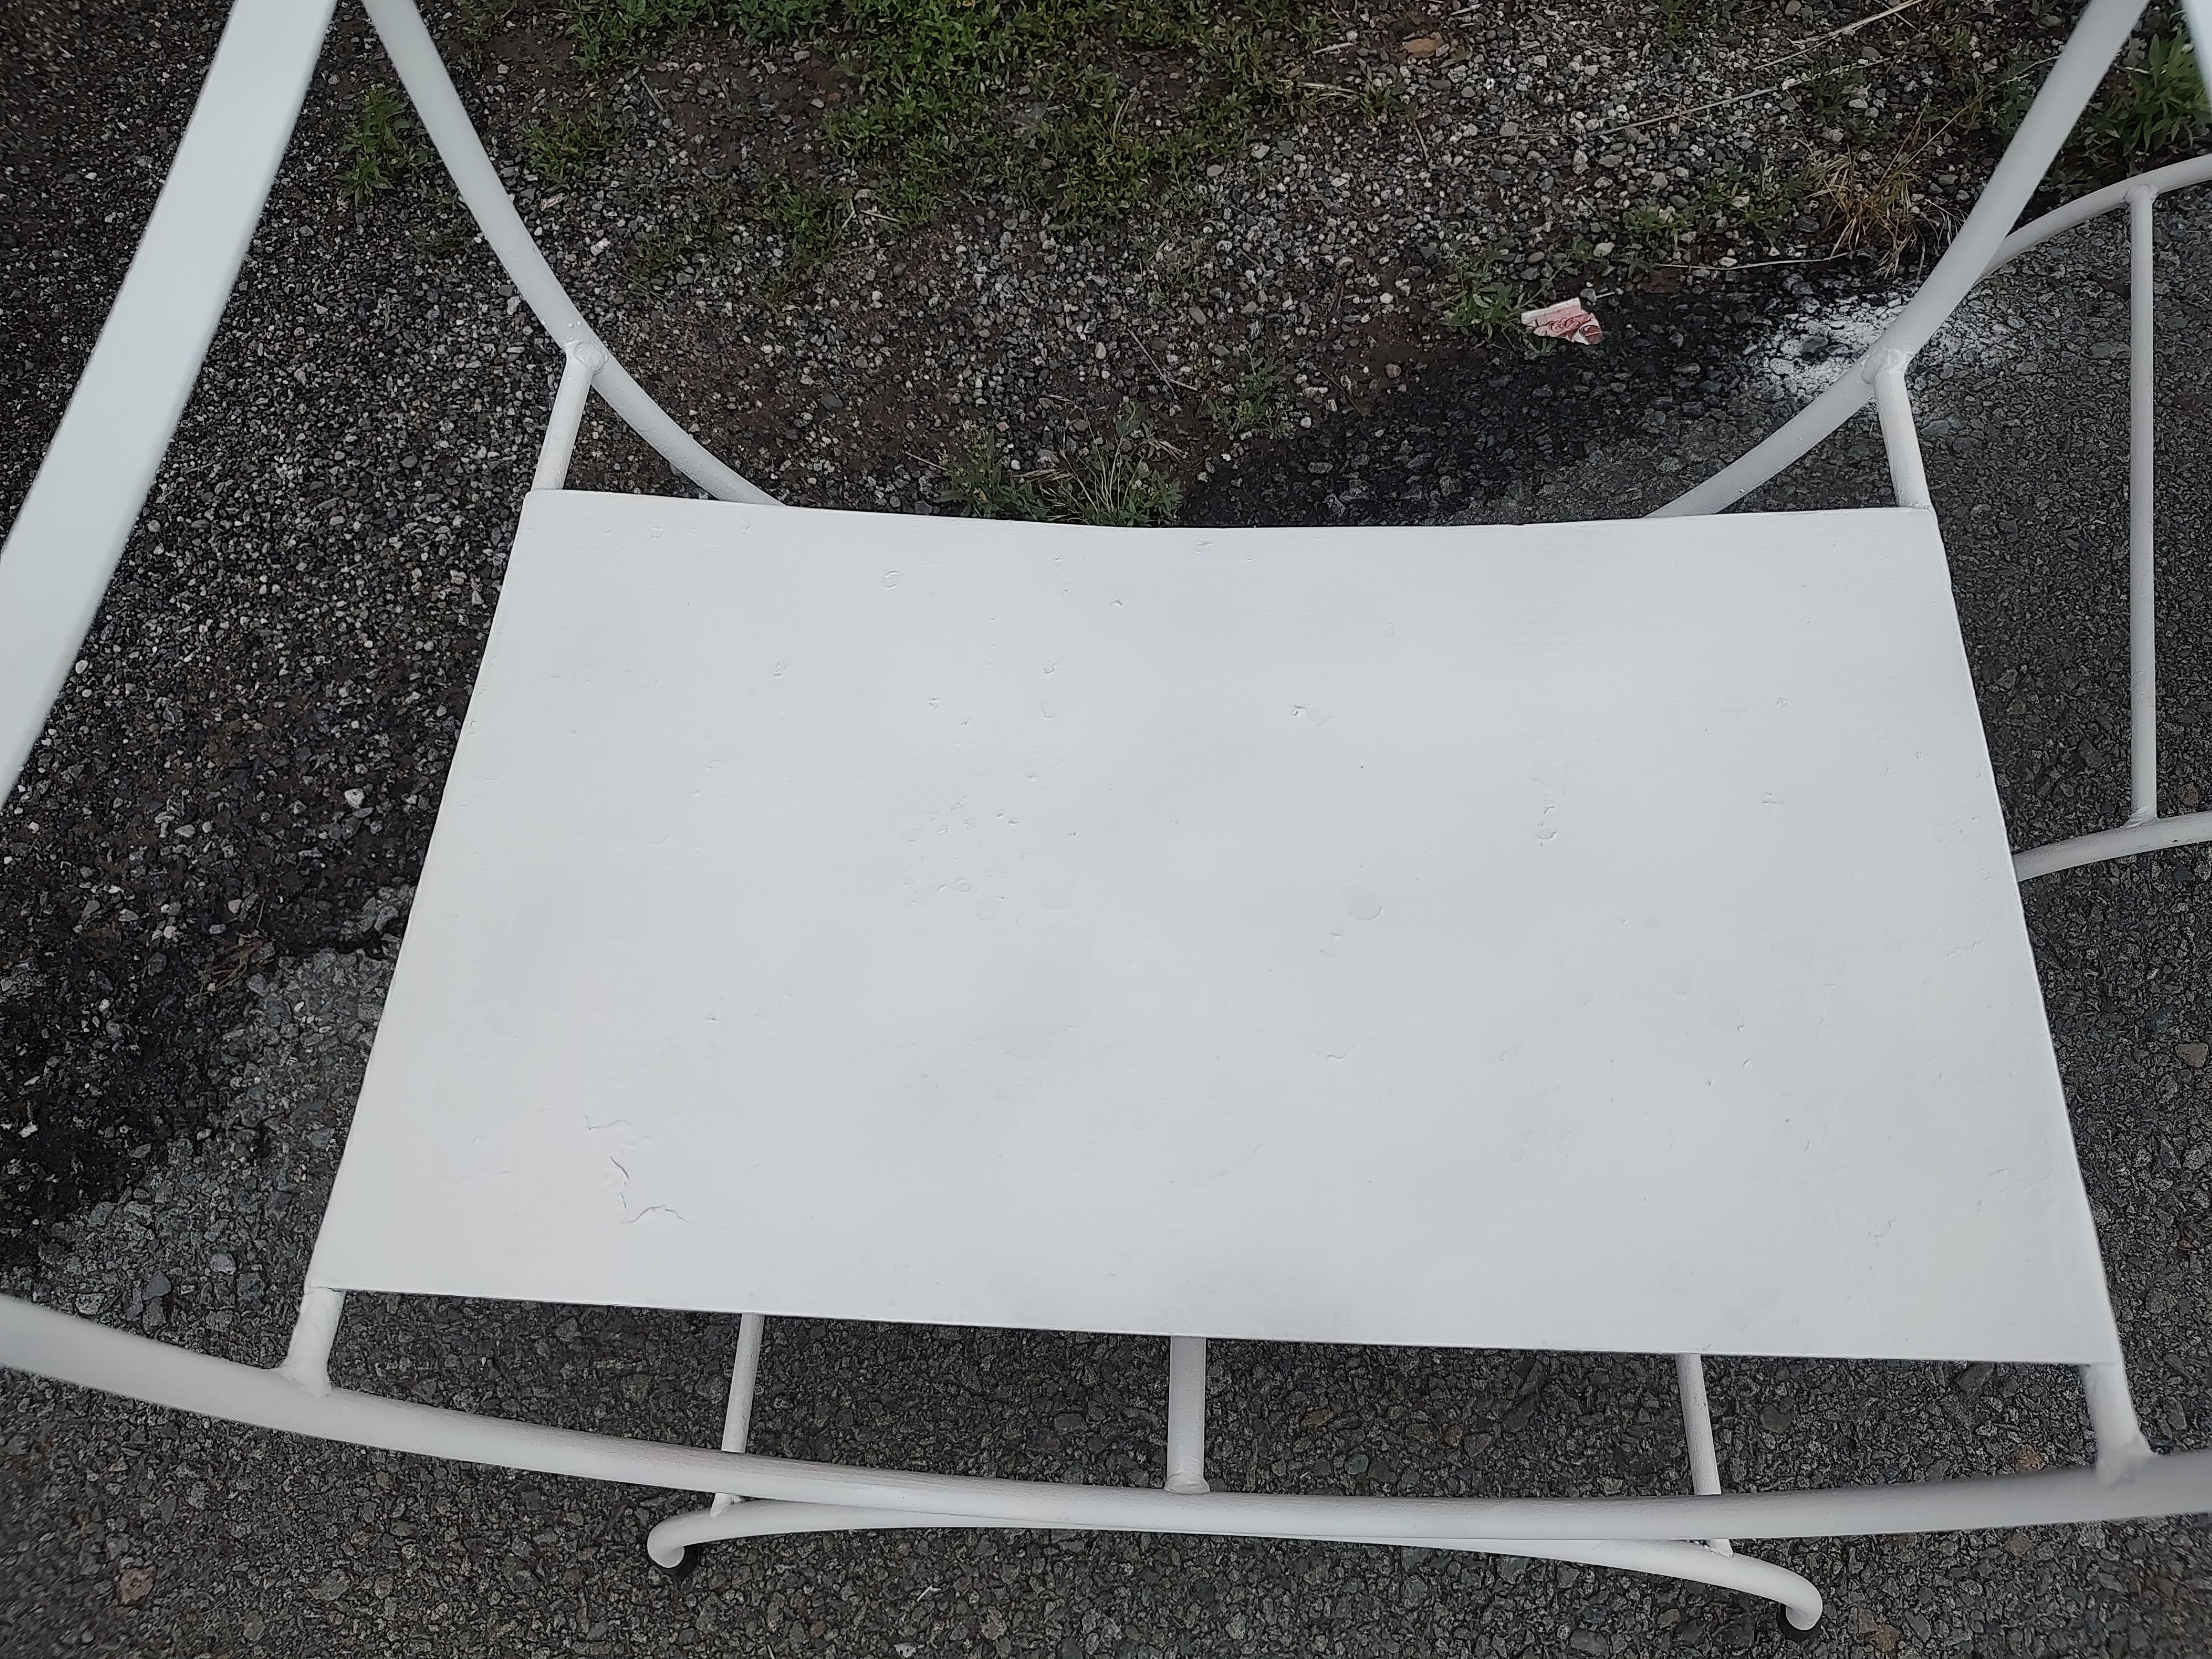 Pair of Mid Century Modern Patio Directors Chairs with Sunbrella Backs 1960 For Sale 7